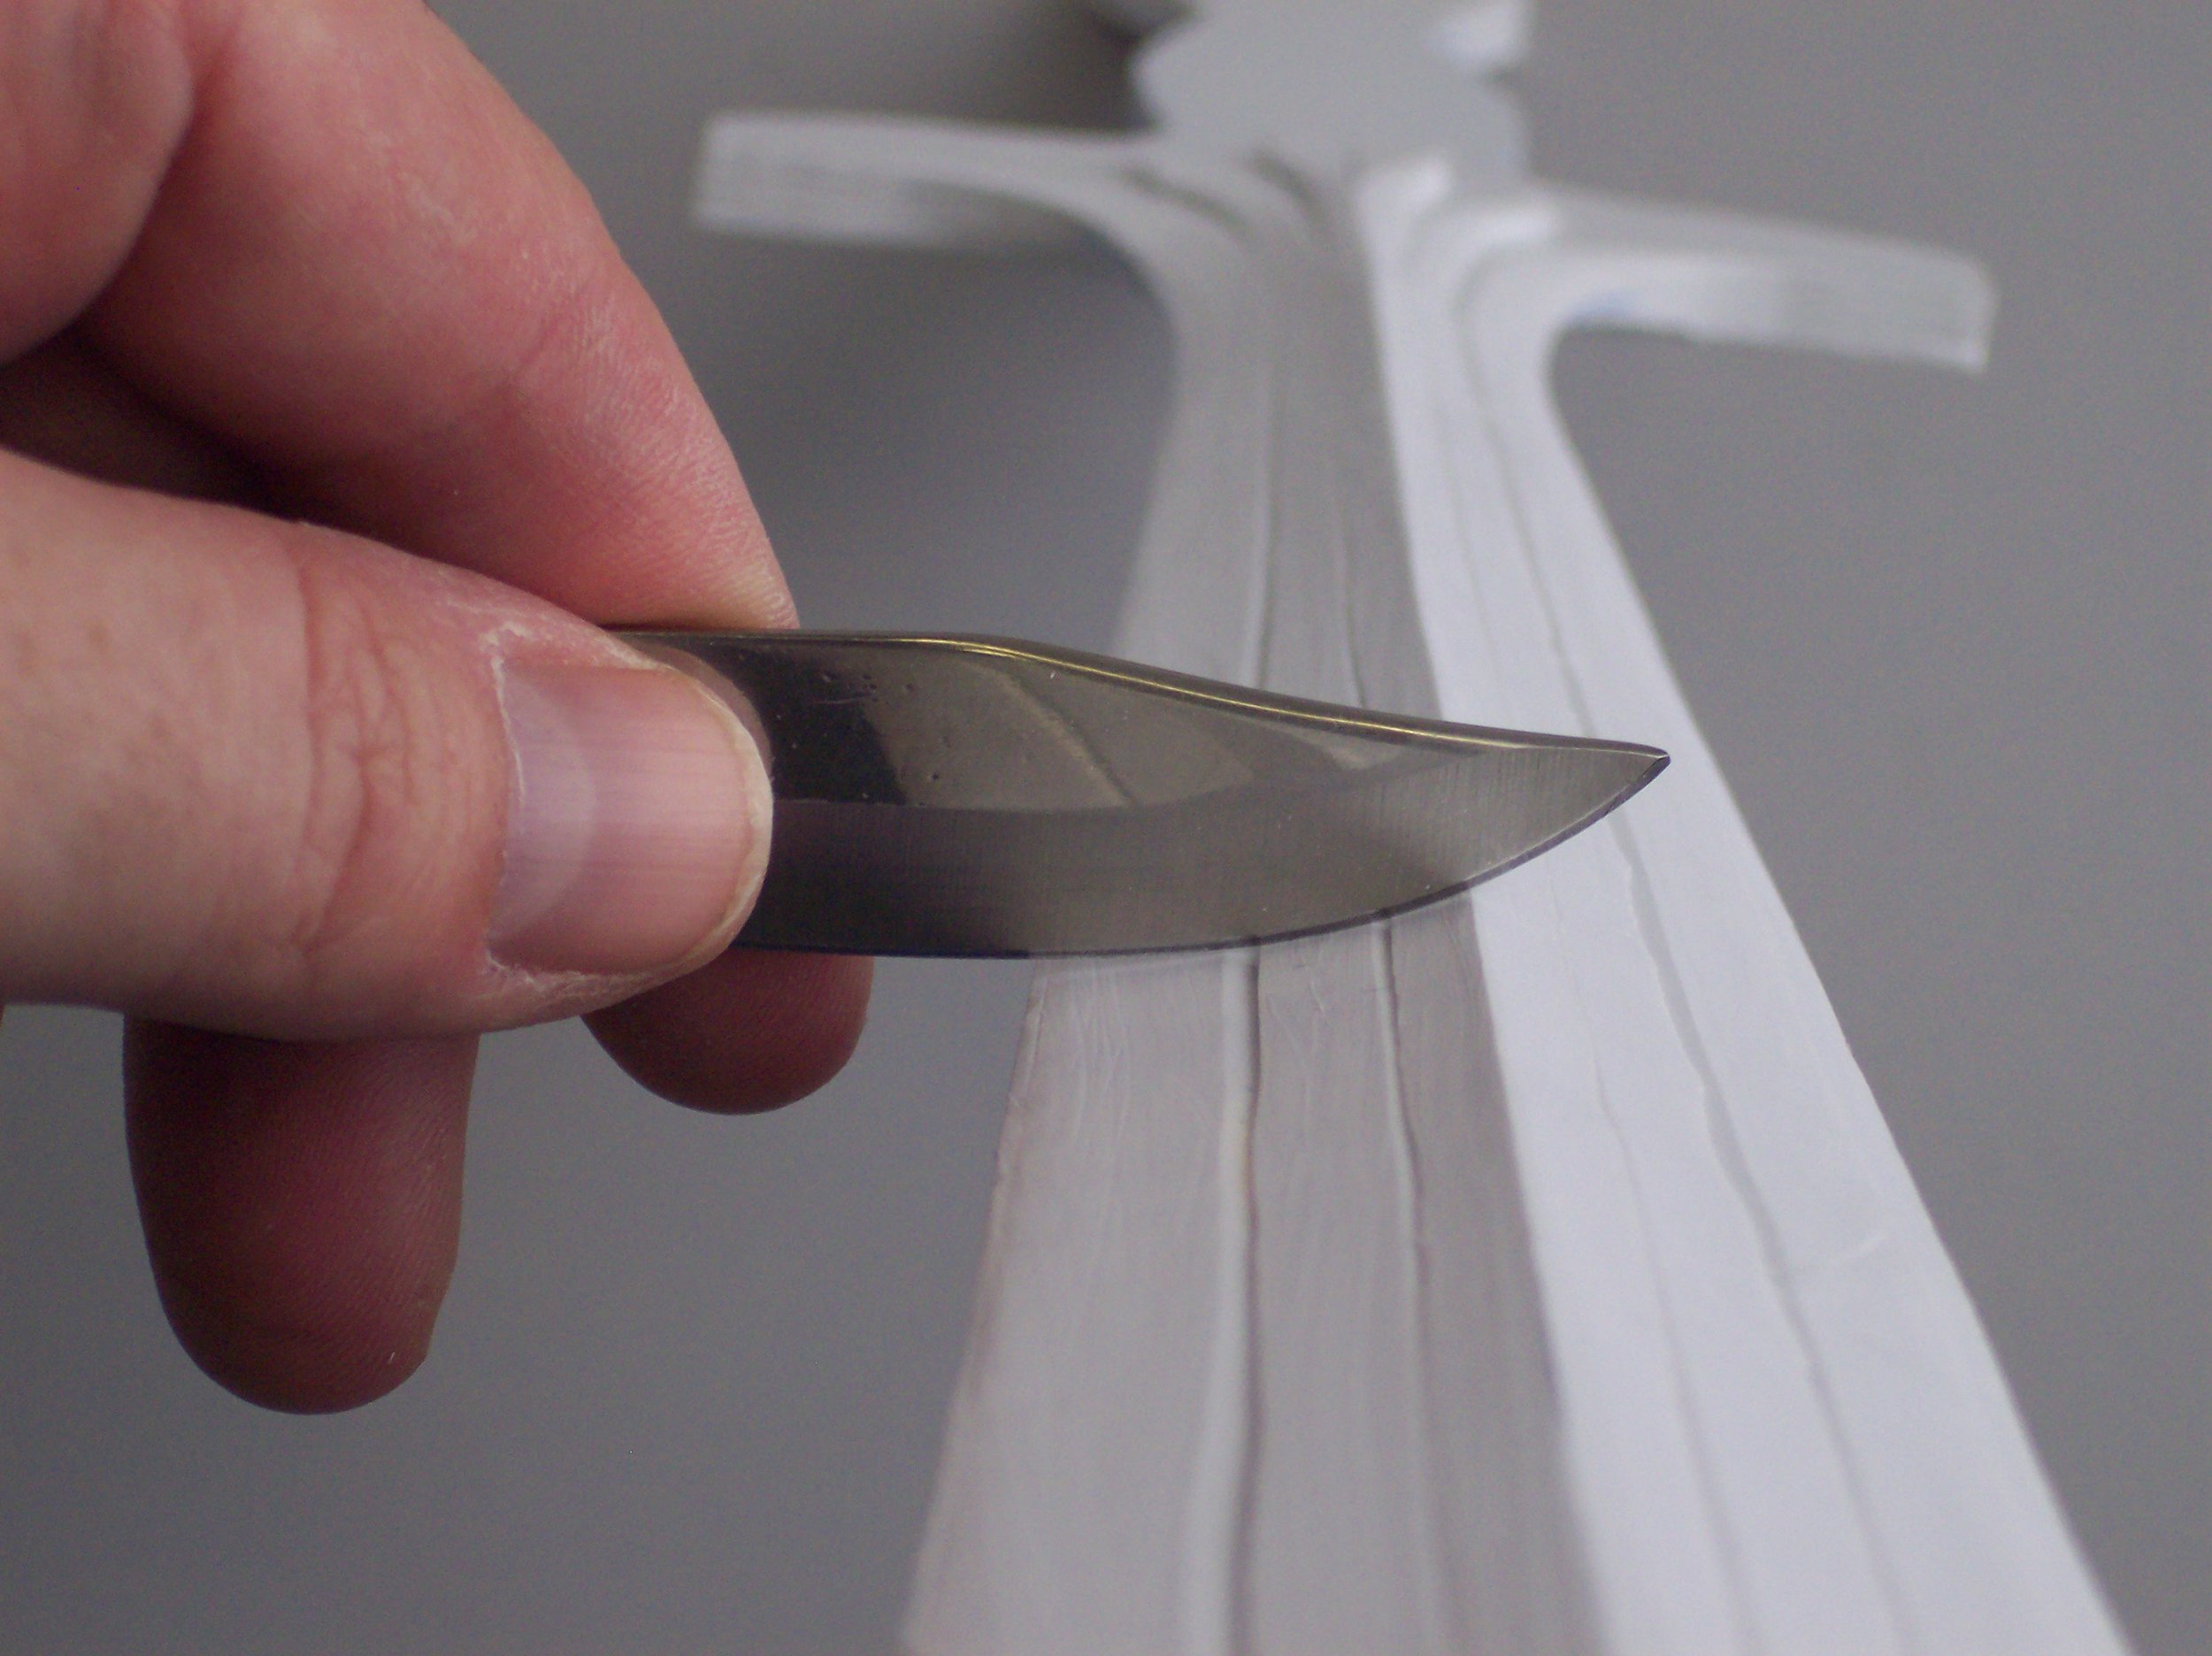  I used the long blade from my Swiss Army knife to shave a blade edge on the sword. Hold the knife’s edge PERPENDICULAR to the surface of the plastic and you can shave the plastic into shape. This also works as a alternative to rough sanding. 